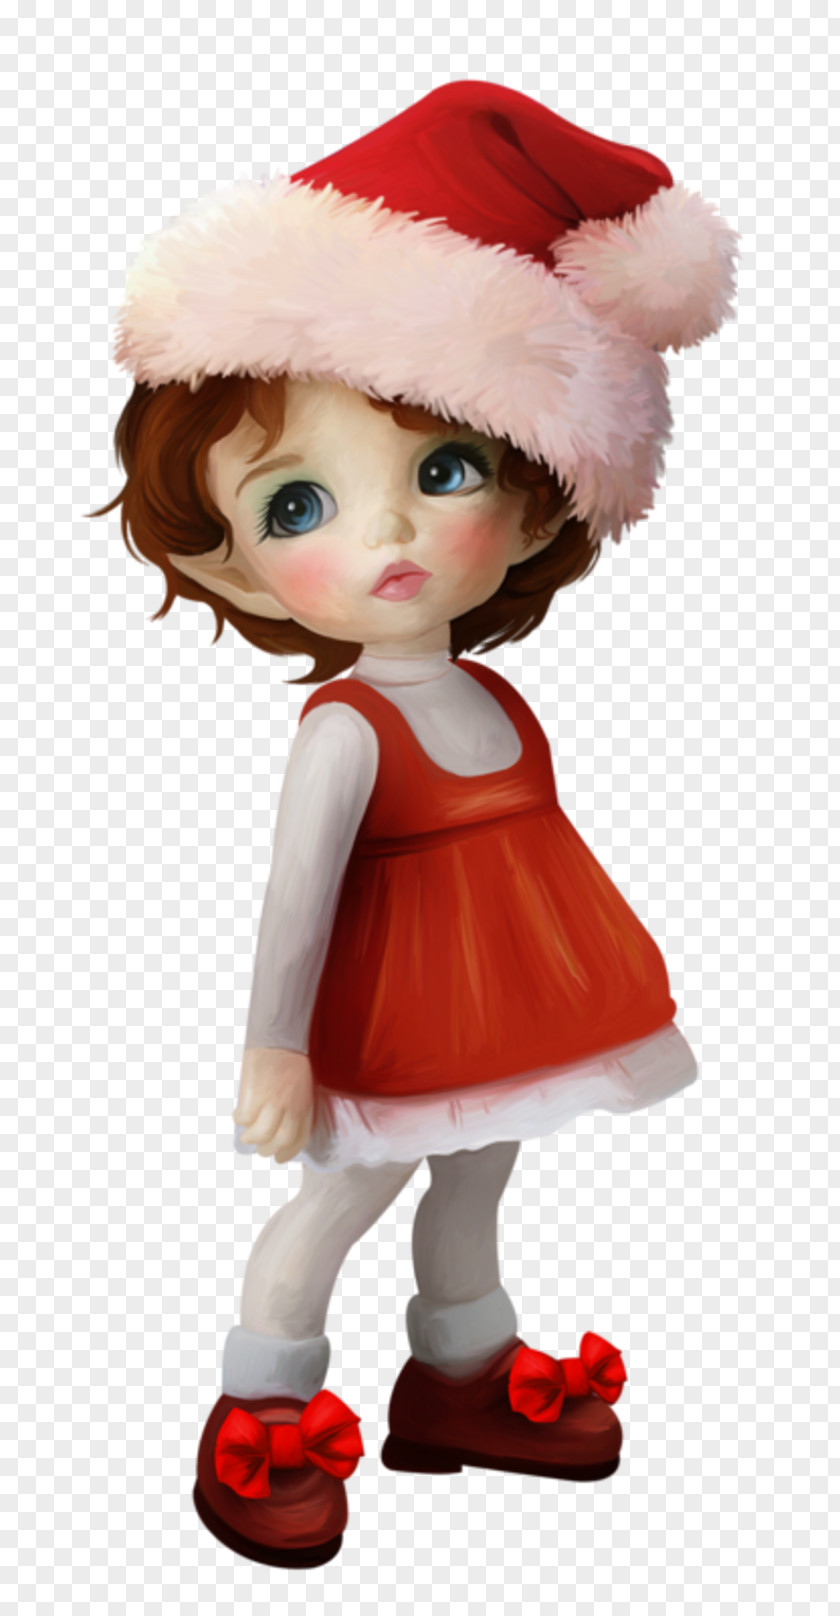 Doll Precious Moments Dolls Christmas Ornament Day Clip Art PNG